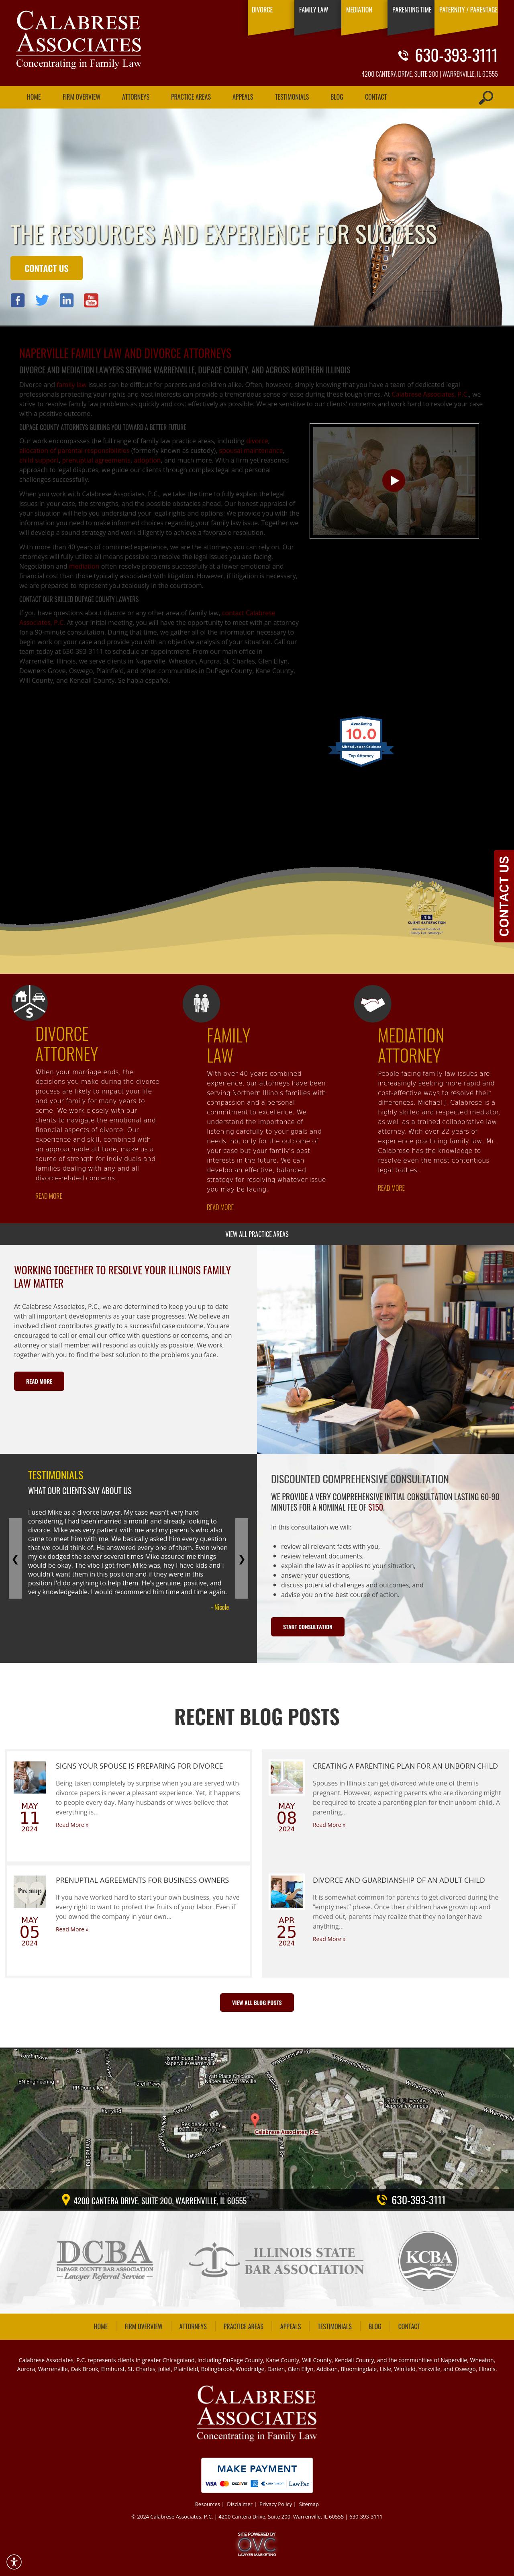 Calabrese Associates - Warrenville IL Lawyers